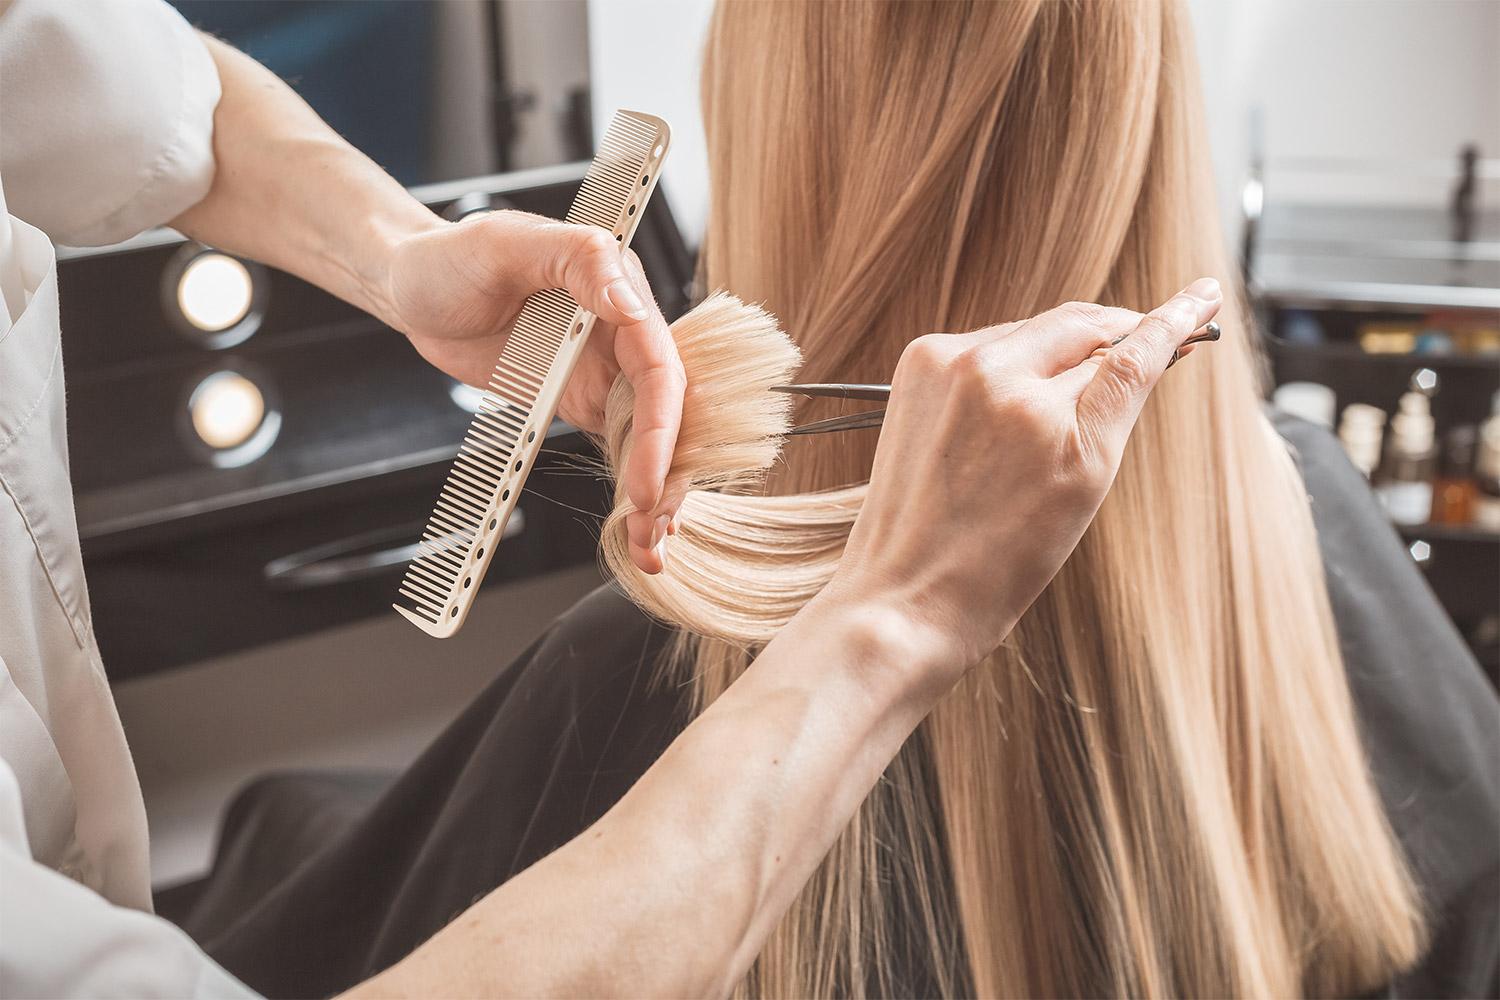 Read more about the article Why You Should Go to a Salon Instead of Trying At-Home Hair Services